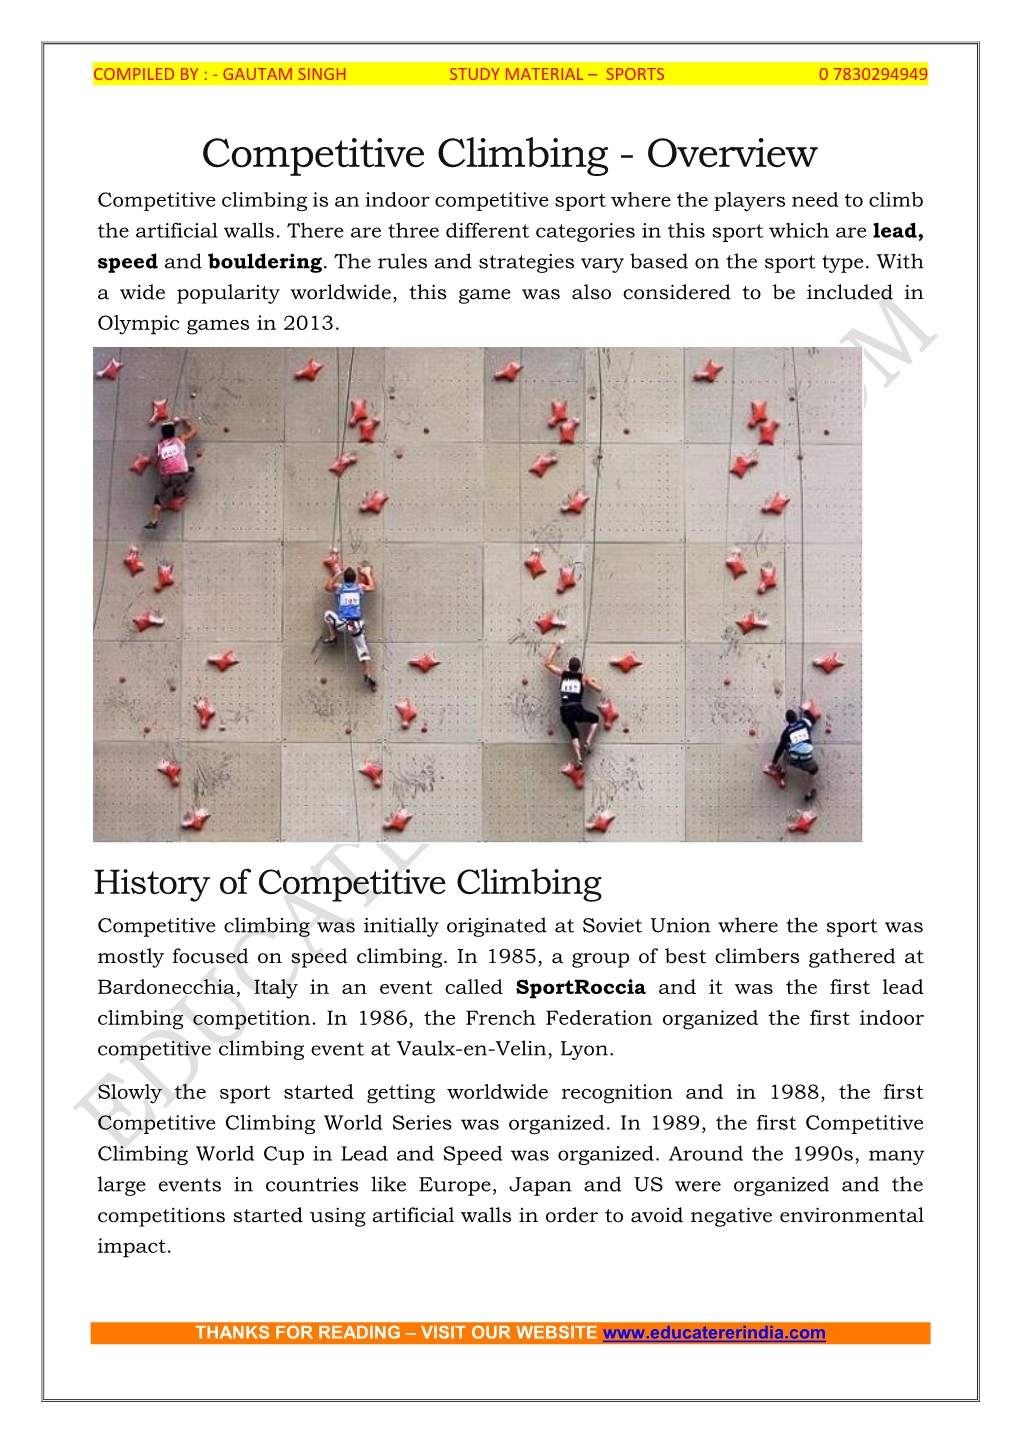 Competitive Climbing - Overview Competitive Climbing Is an Indoor Competitive Sport Where the Players Need to Climb the Artificial Walls